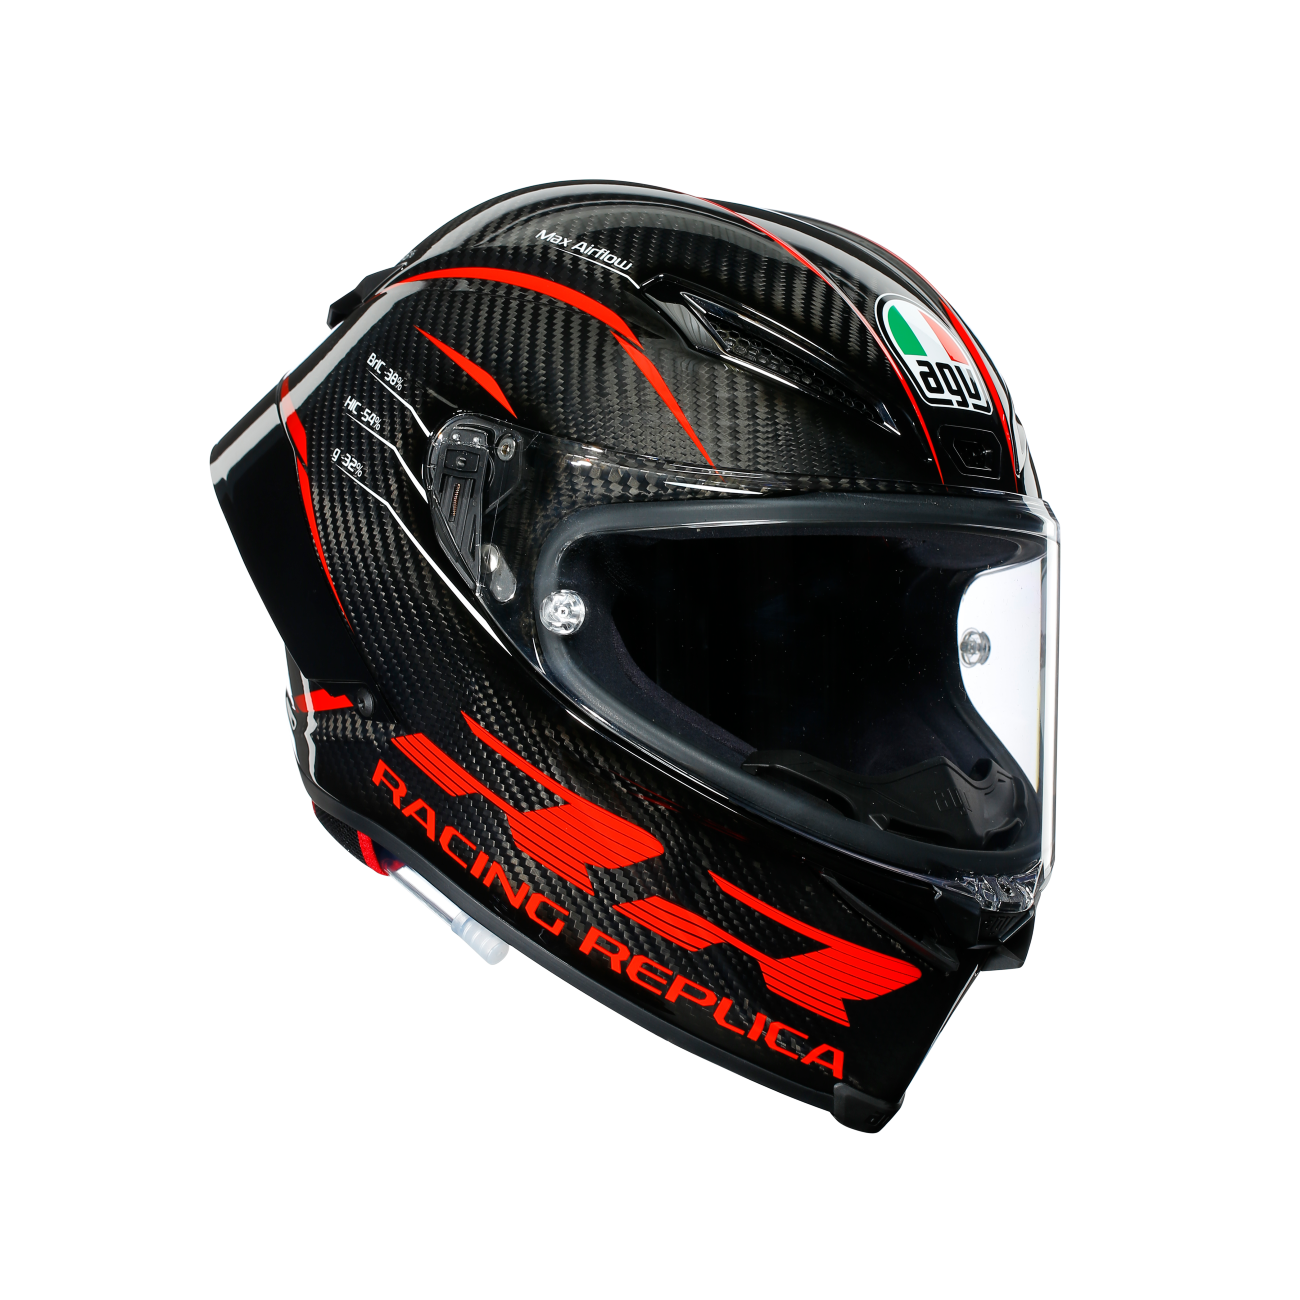 PISTA GP RR JIST Asian Fit 005-PERFORMANCE CARBON/RED | AGV ヘルメット